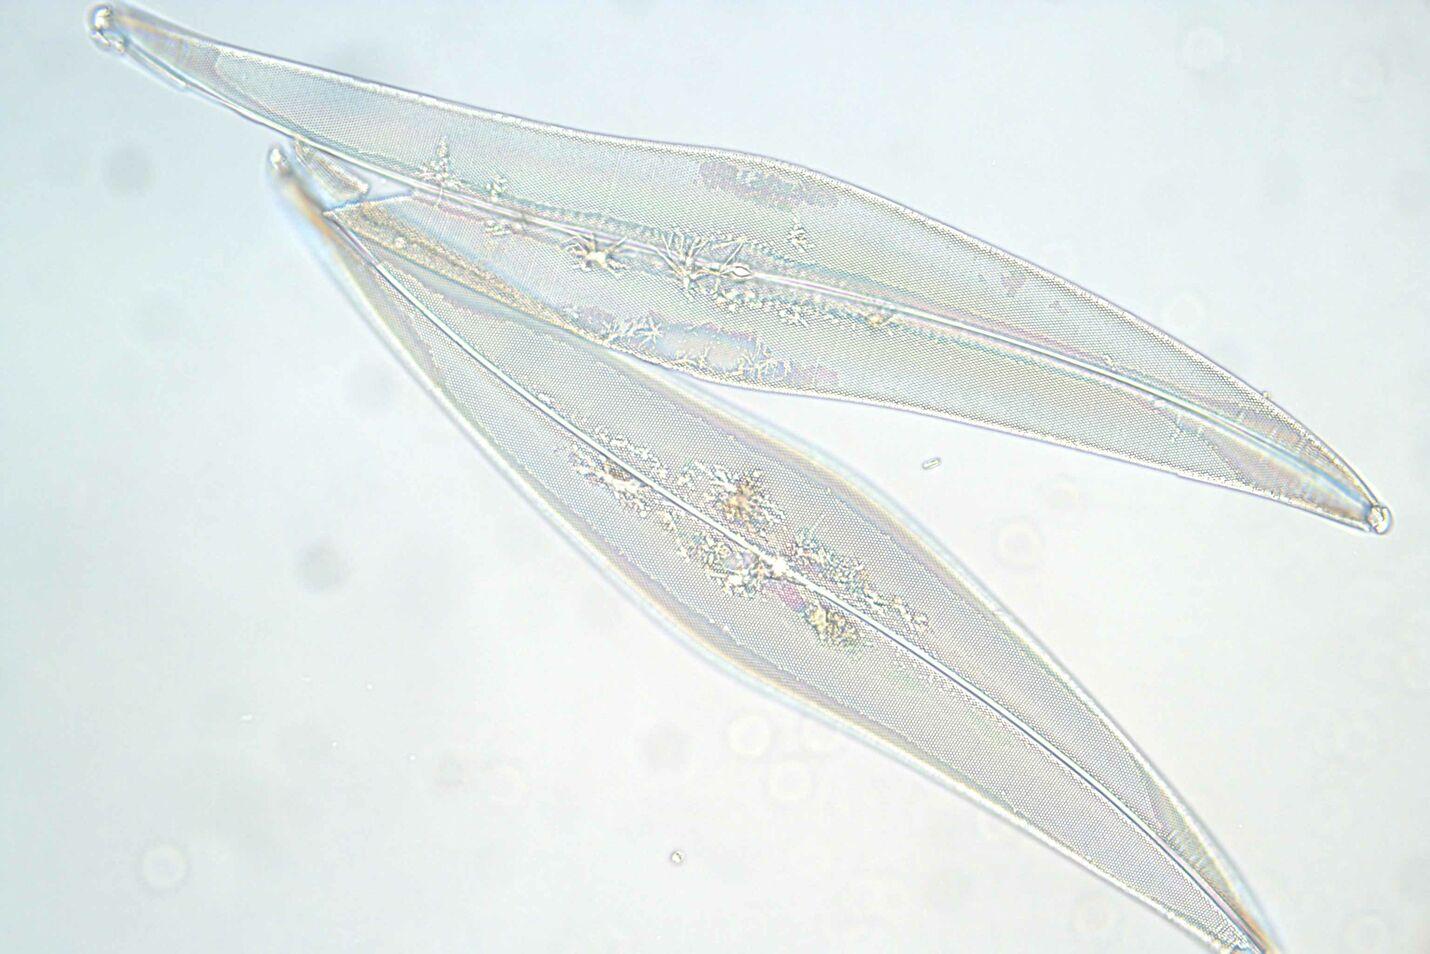 Diatoms imaged with leica k3